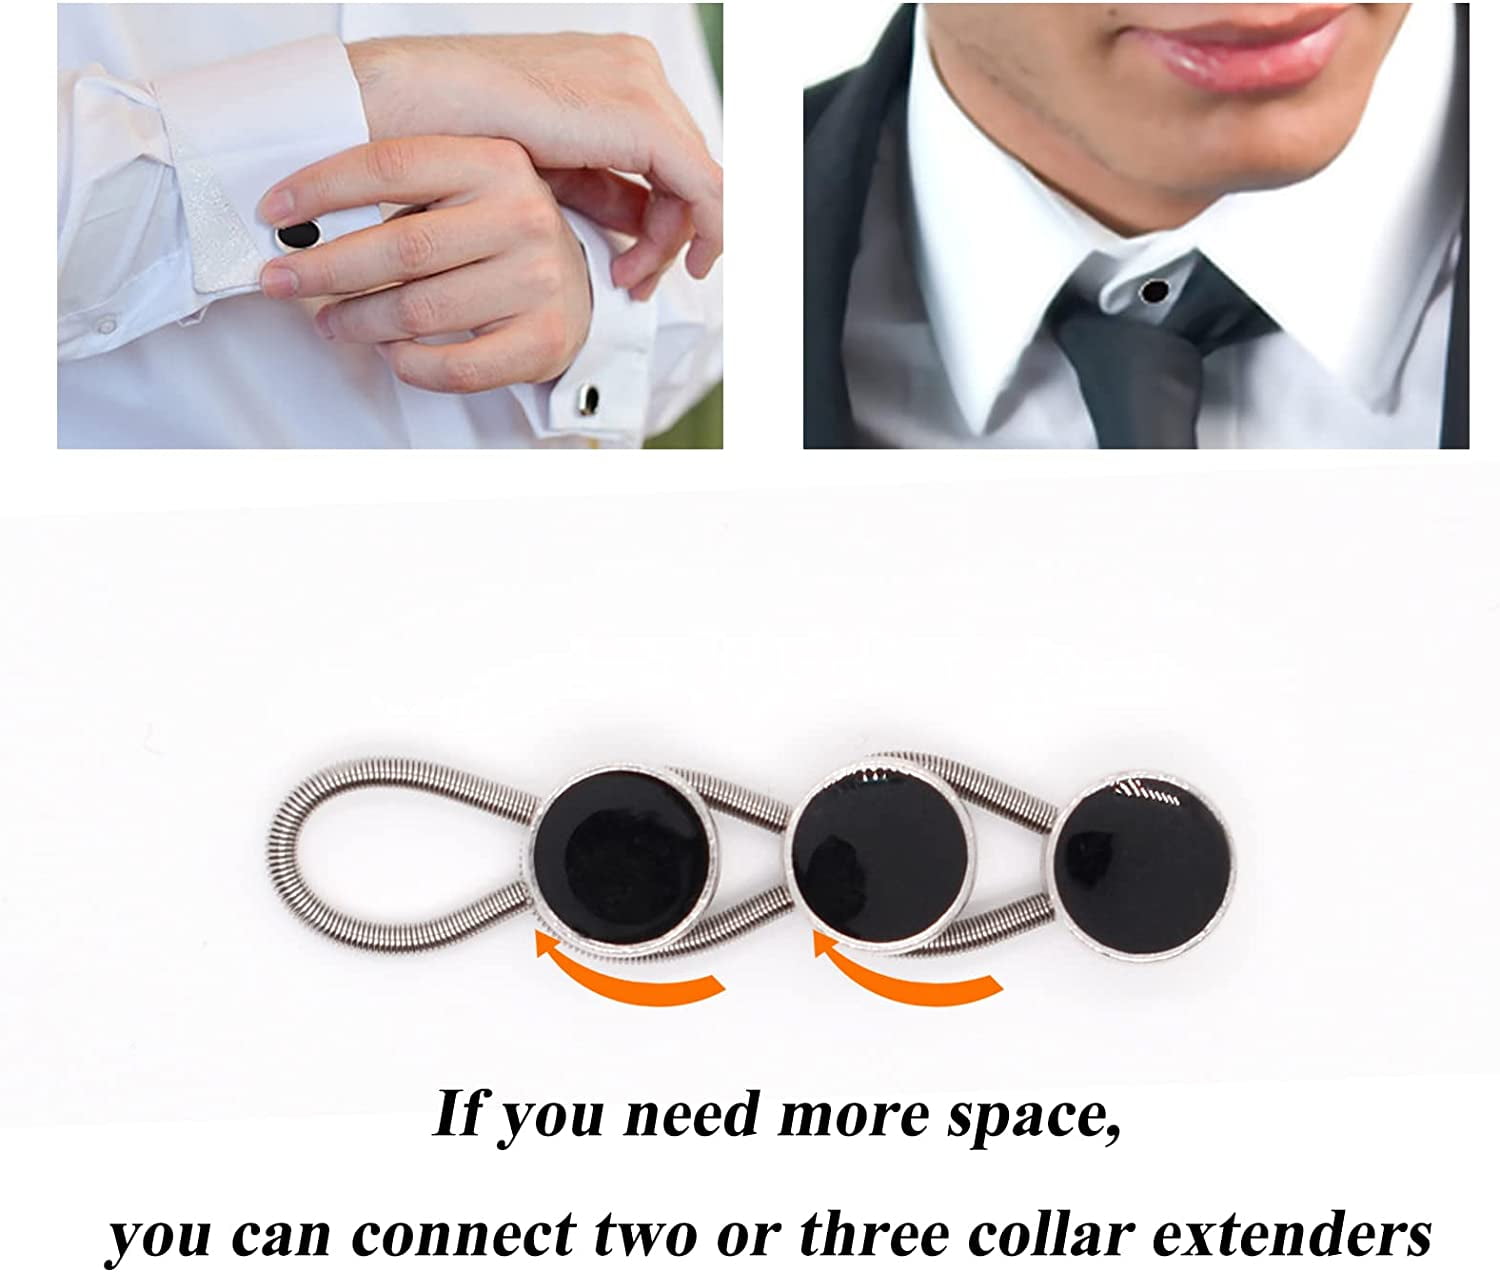 TRIANU 6Pcs Metal Collar Extenders Stretch Neck Extender for 1/2 Size  Expansion of Men Dress Shirts, White 